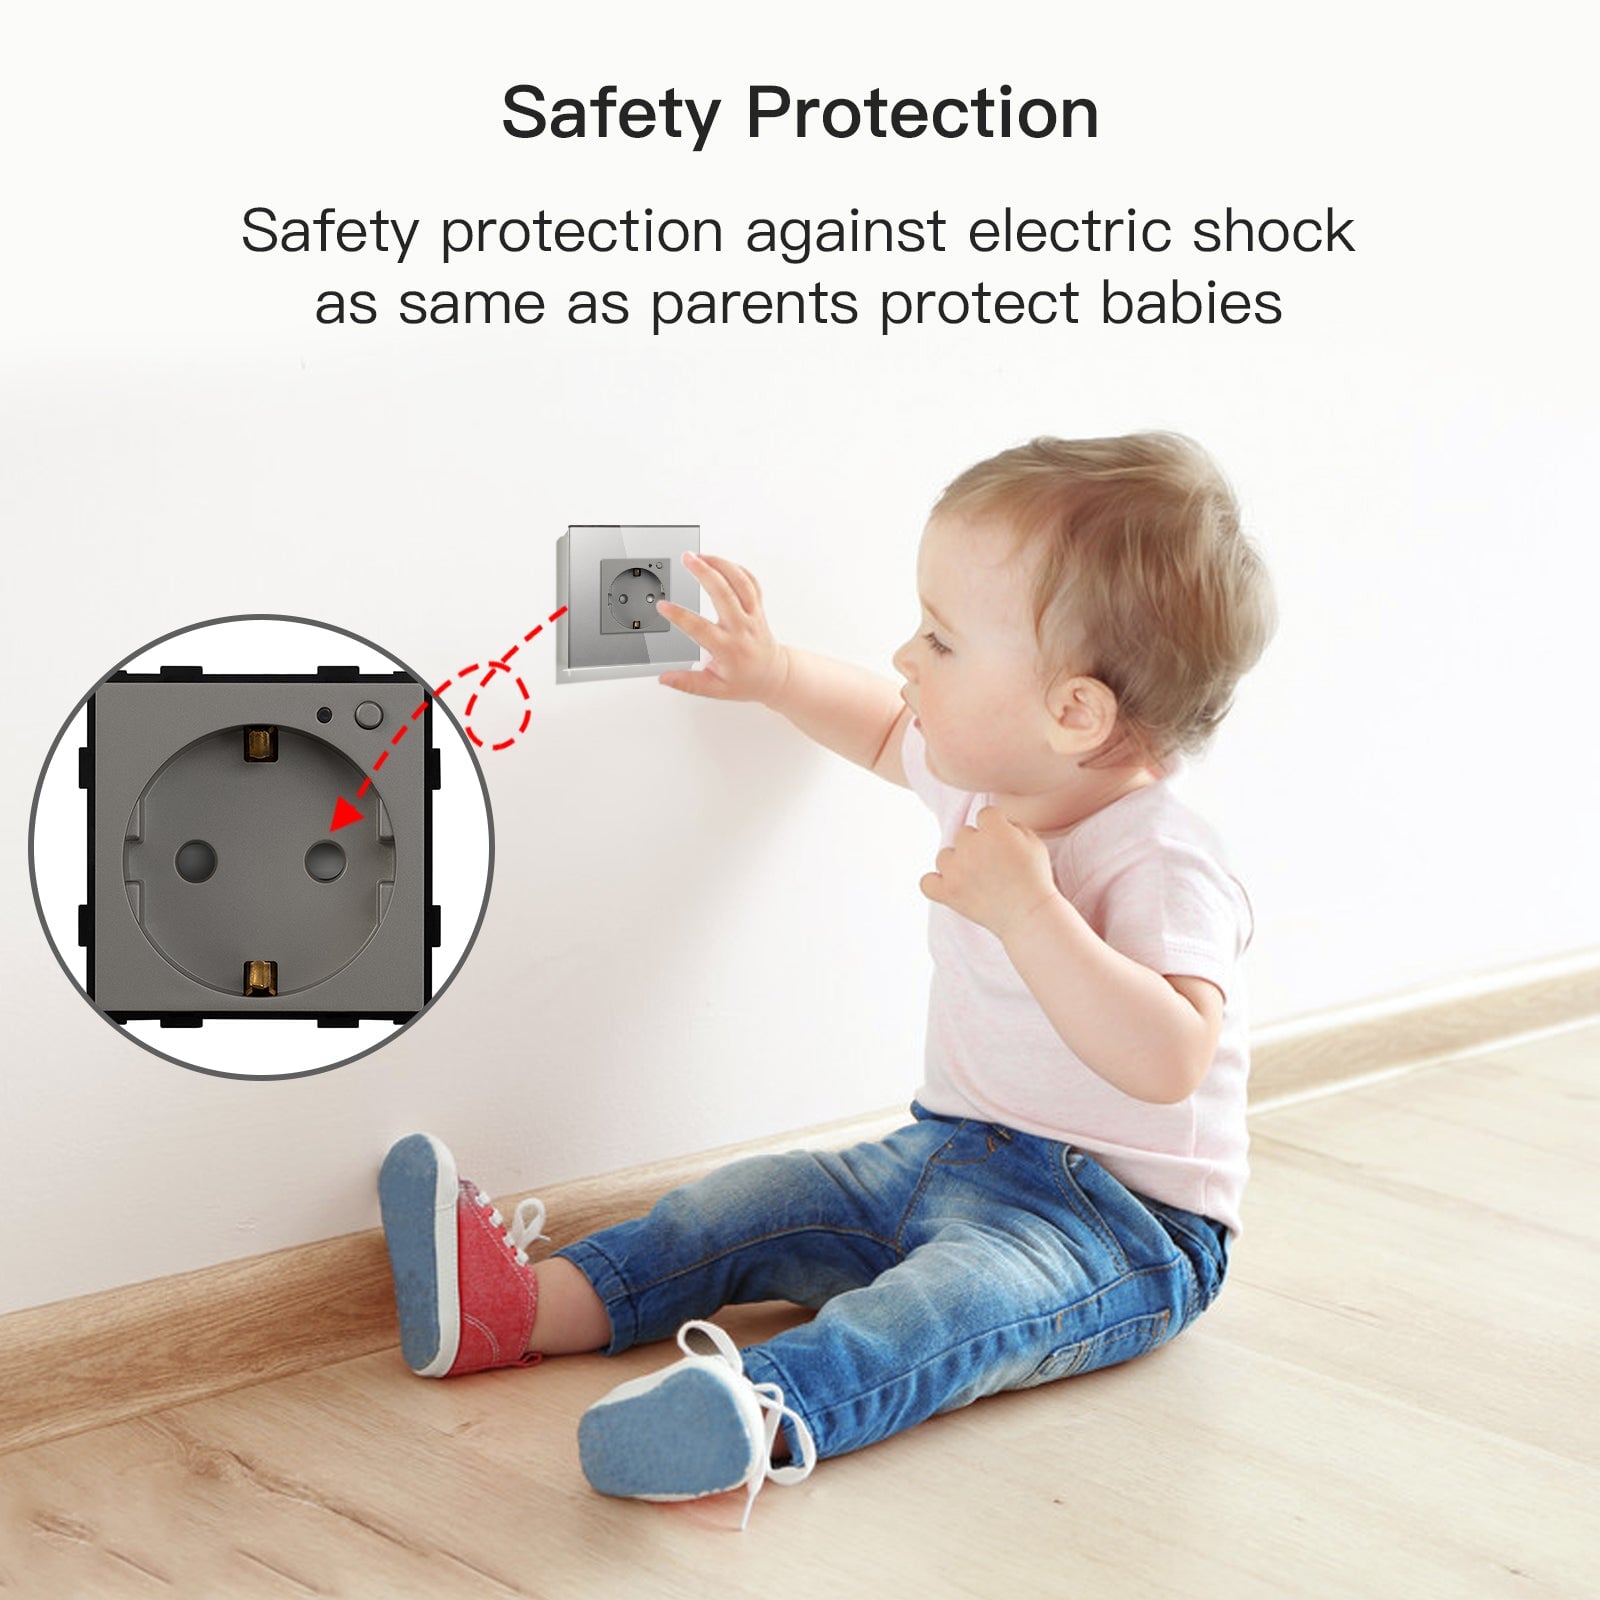 BSEED Wifi EU Wall Sockets Single Power Outlets Kids Protection Wall Plates & Covers Bseedswitch 